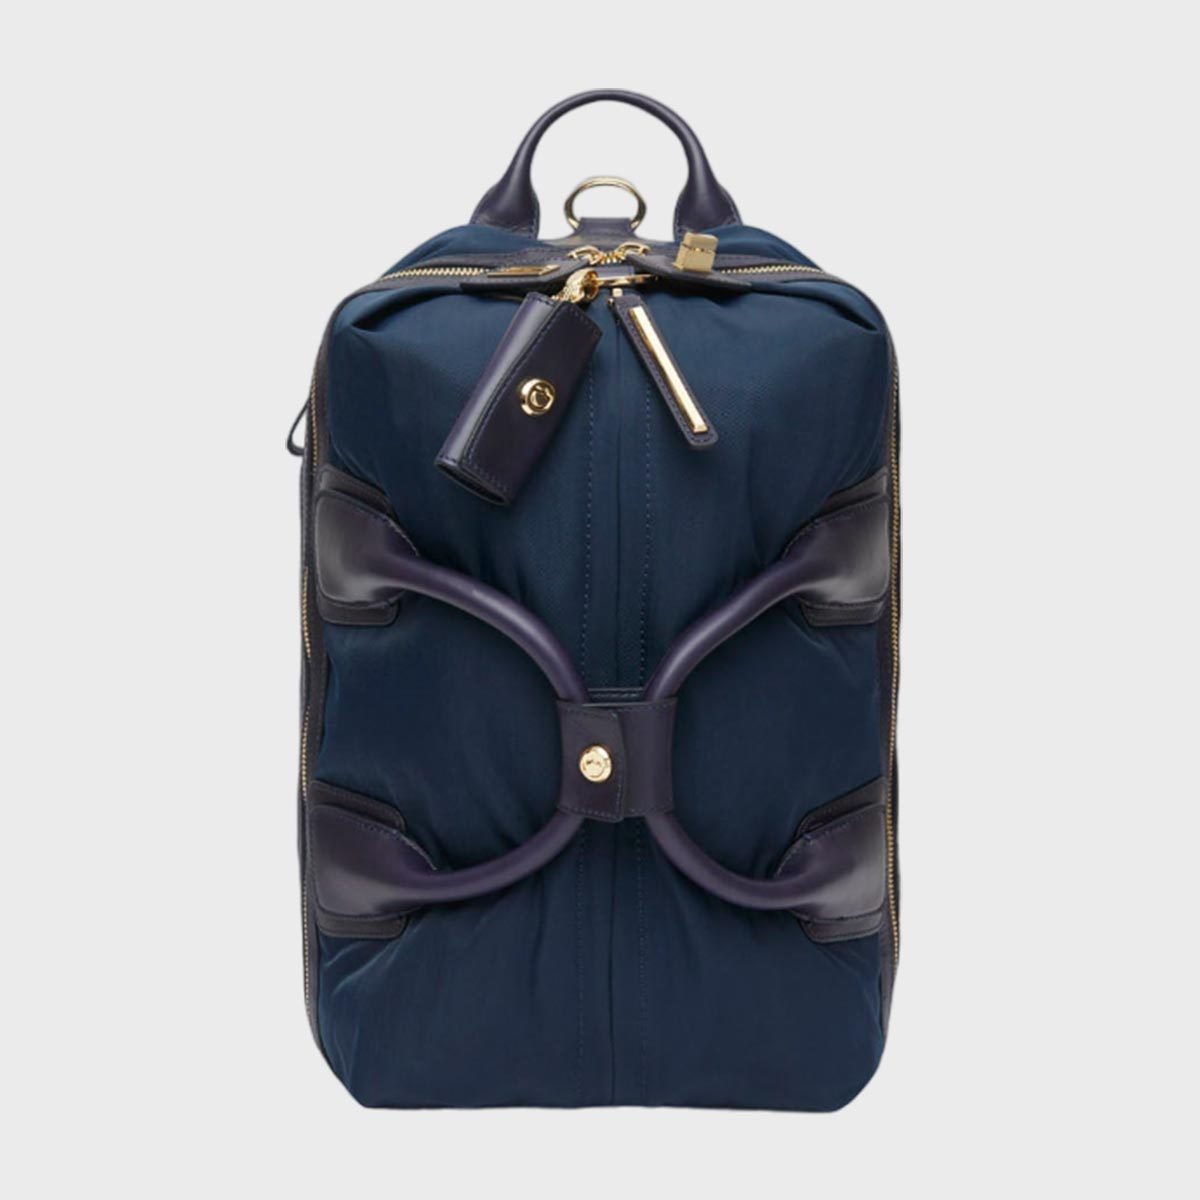 <h3 class="">Caraa Studio Bag</h3> <p>Caraa is loved for its chic convertible bags, and its <a href="https://caraa.co/products/studio-bag-medium-navy" rel="noopener noreferrer">Studio design</a> will be a new favorite travel companion. It earns our best travel backpack spot for its superior versatility, fashionable and luxurious finishes and functional design details. Luxury water-resistant nylon and Italian leather accents are made to last, and a secure turn-lock main compartment, padded zippered back pocket and external easy-to-grab side pocket make <a href="https://www.rd.com/list/packing-tips/" rel="noopener noreferrer">packing</a> a piece of cake. Thoughtful details—like breathing vents in the main compartment, a waterproof and antimicrobial lining and a moisture-wicking mesh back—make this bag worth the splurge. It also comes with a waterproof wet clothes bag and a waterproof shoe pouch.</p> <p>"I LOVE LOVE LOVE this bag. And it never ceases to amaze me. I've had mine for a year and it still looks brand new—despite being used every day," writes Tatiana, a verified reviewer.</p> <p><strong>Pros</strong></p> <ul> <li class="">Three carrying modes</li> <li class="">Moisture-wicking backpack straps</li> <li class="">Anti-slip rubberized crossbody strap</li> <li class="">Dedicated 13-inch laptop pocket</li> <li class="">Available in two sizes and multiple colors</li> </ul> <p><strong>Cons</strong></p> <ul> <li class="">Expensive</li> </ul> <p class="listicle-page__cta-button-shop"><a class="shop-btn" href="https://caraa.co/products/studio-bag-medium-navy">Shop Now</a></p>